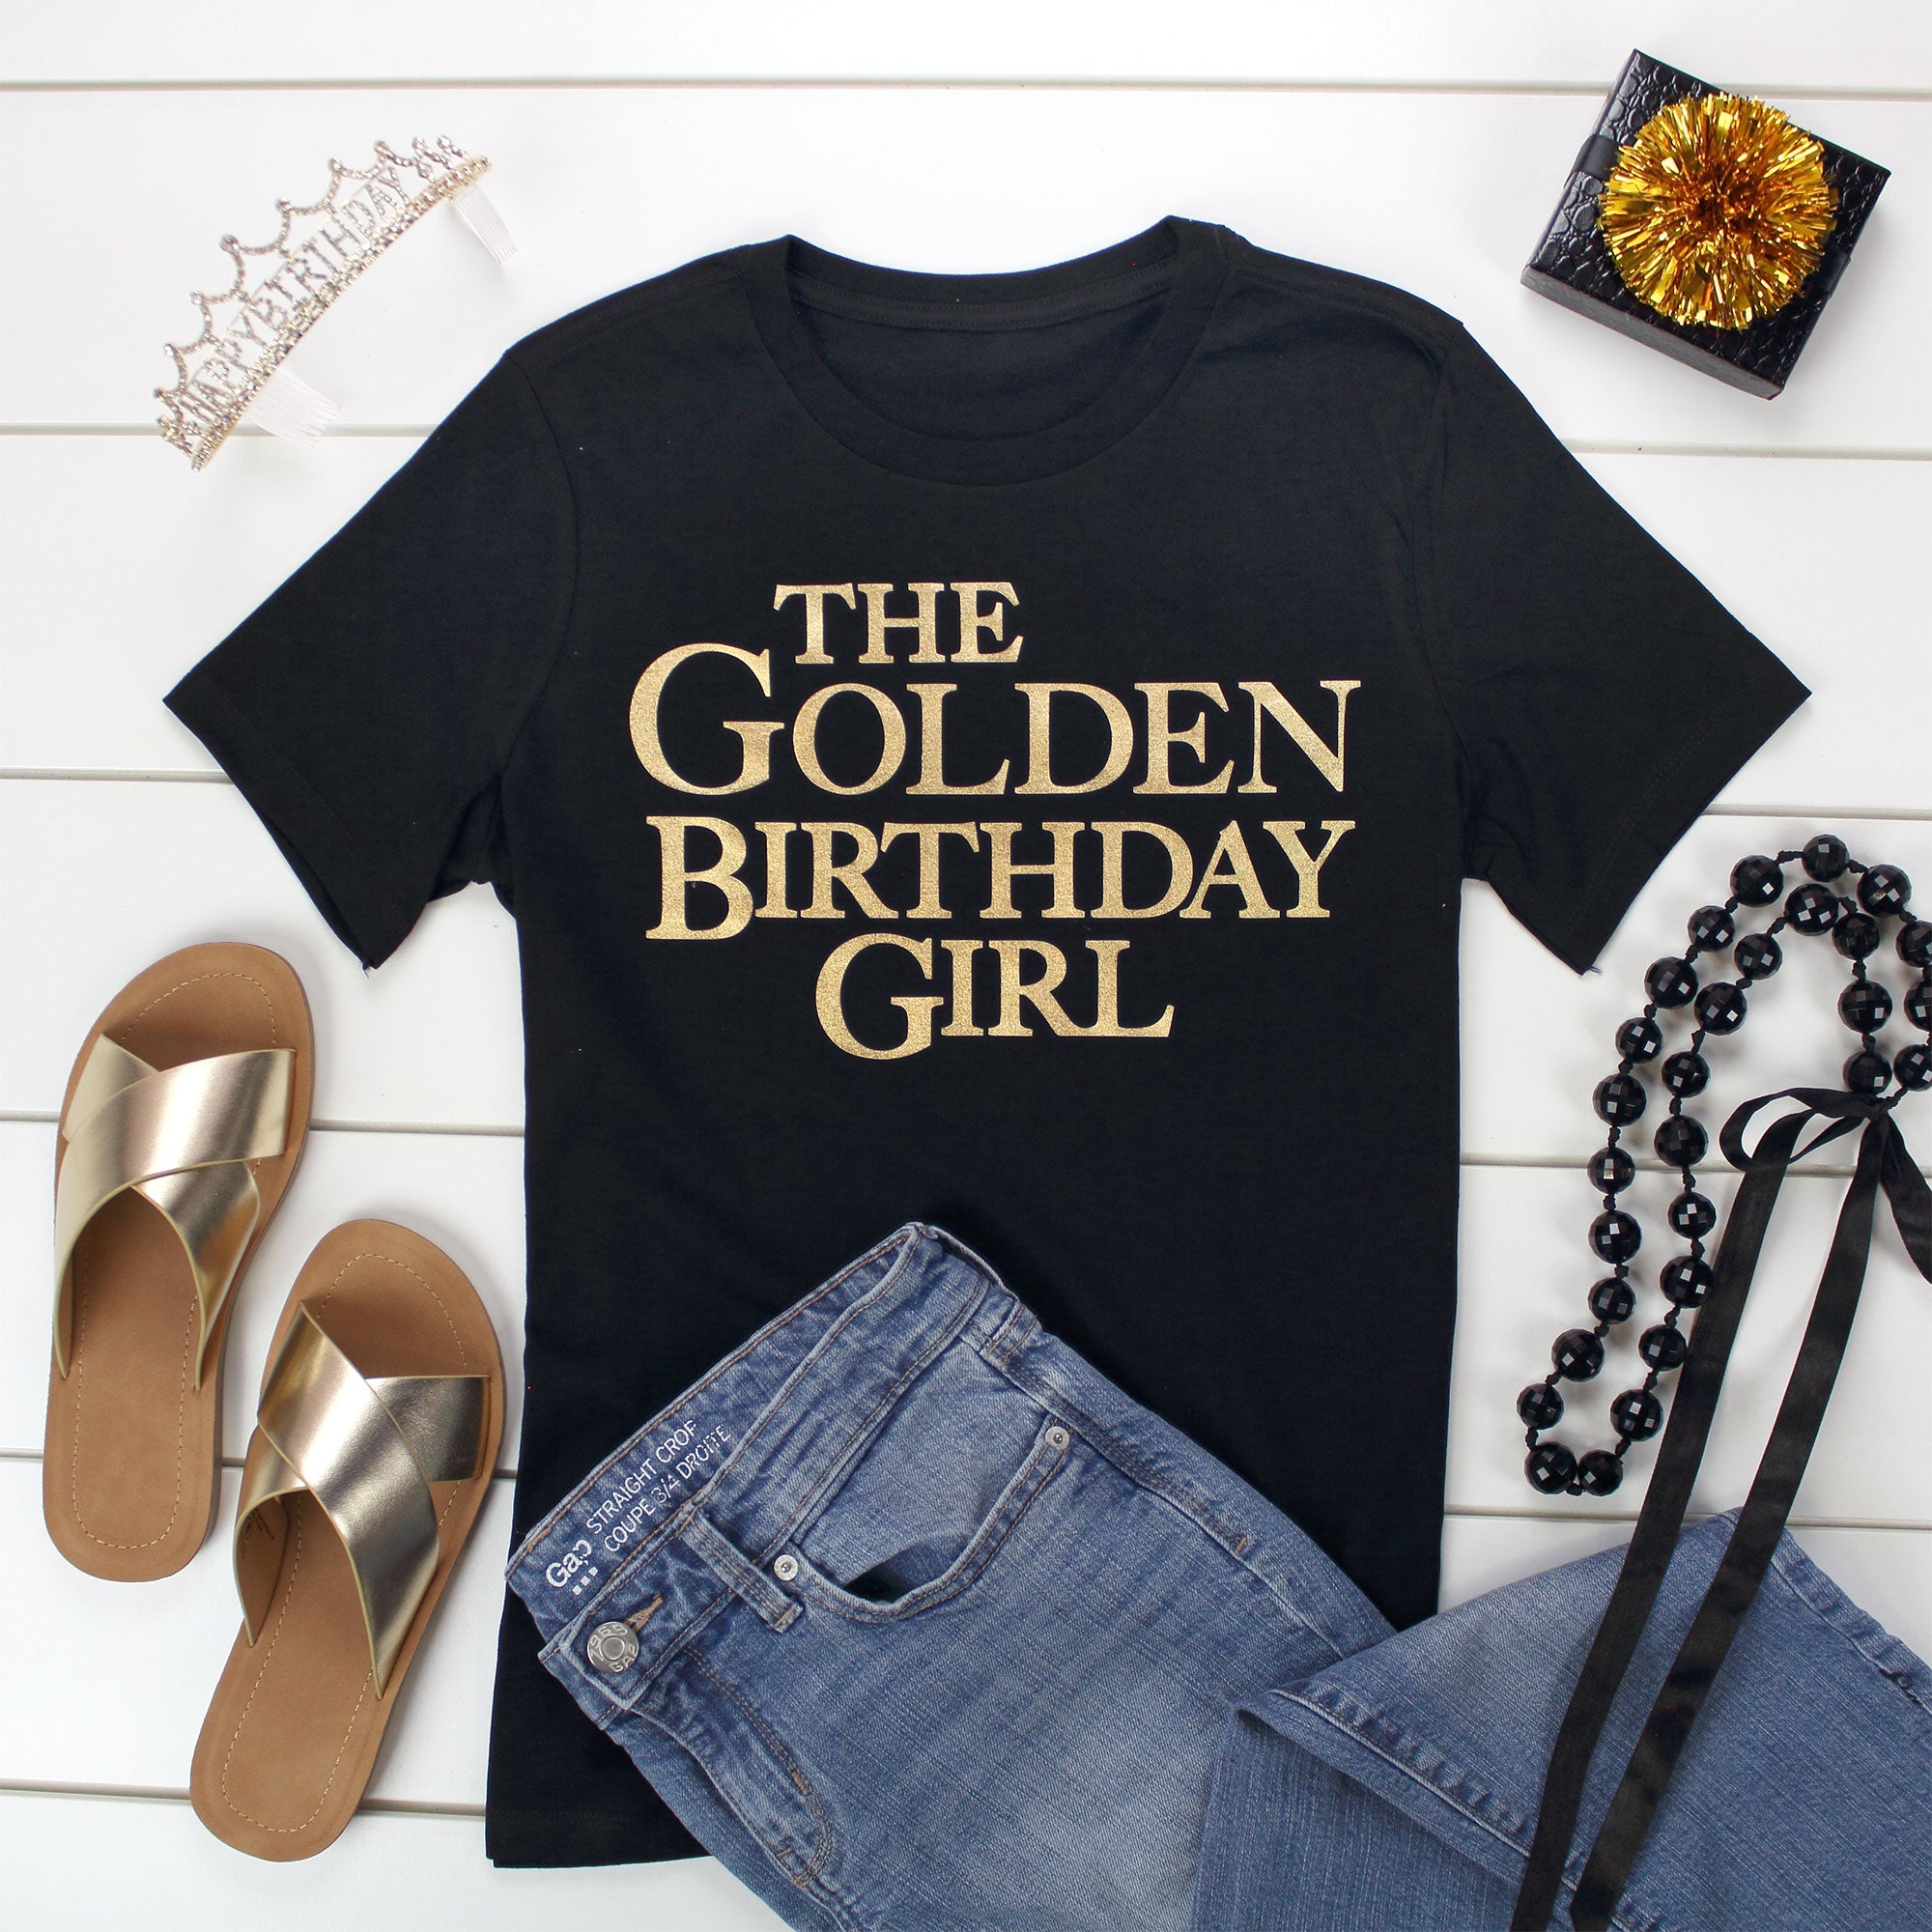 Golden Girls T-Shirts: The Perfect Birthday Gift or Group Outing Attire | Prime Party | Themed Party Supplies, Party Decorations & Gifts